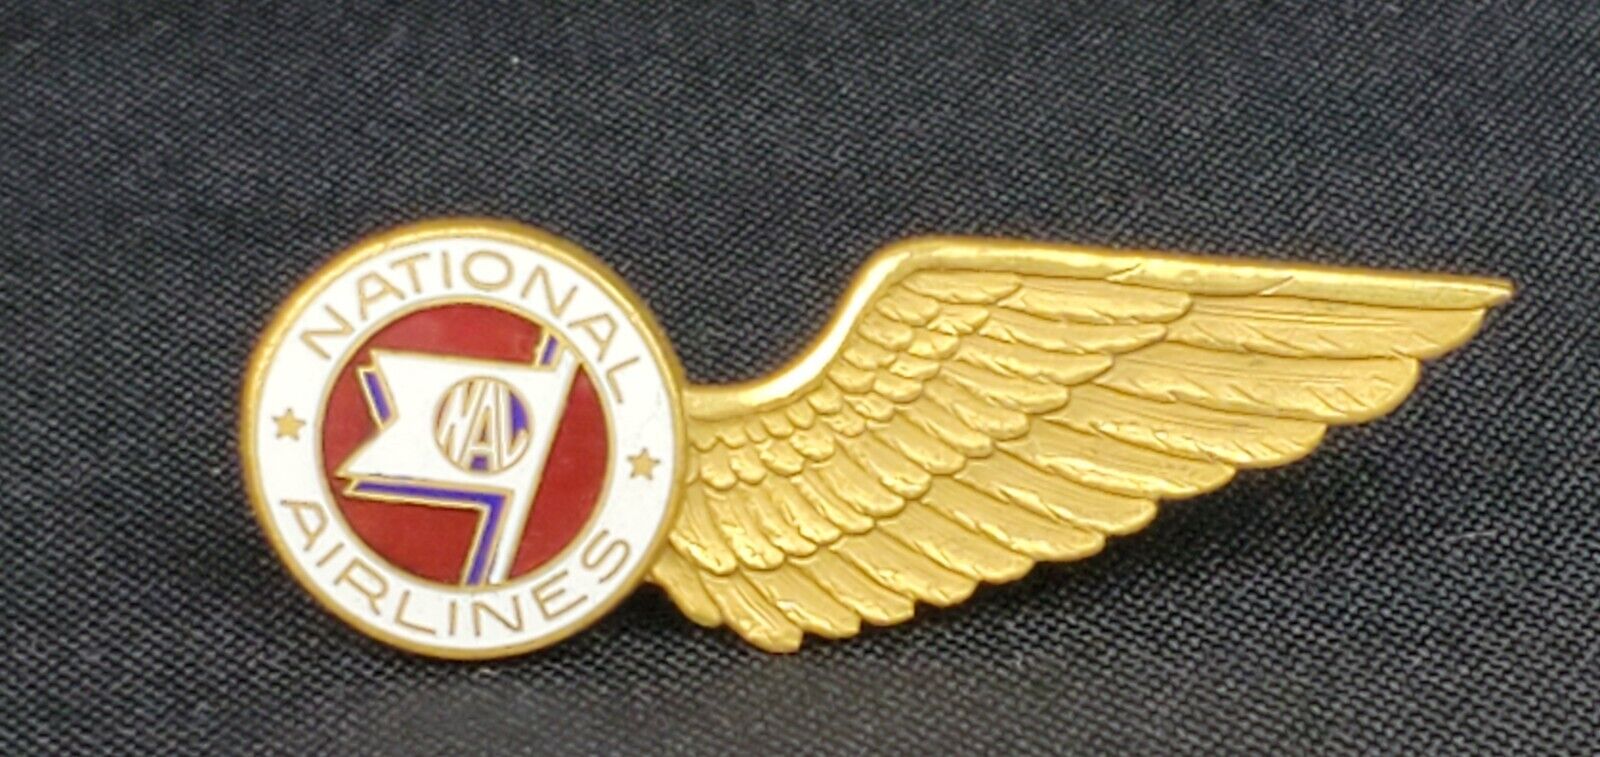 Vintage National Airlines Stewardess Clip Pin Badge 1st Issue Brass and Enamel